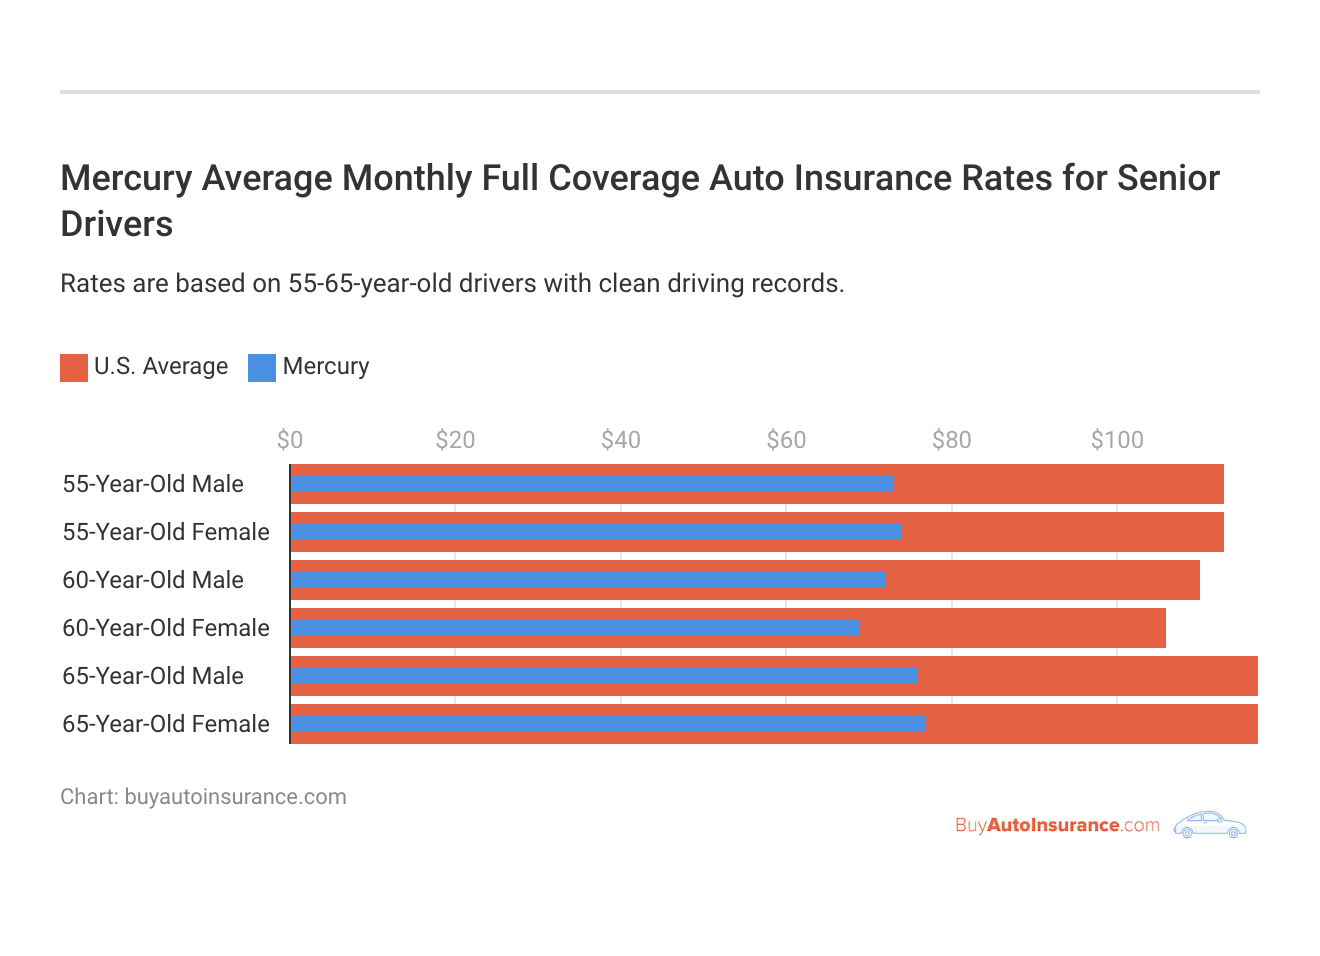 <h3>Mercury Average Monthly Full Coverage Auto Insurance Rates for Senior Drivers</h3>